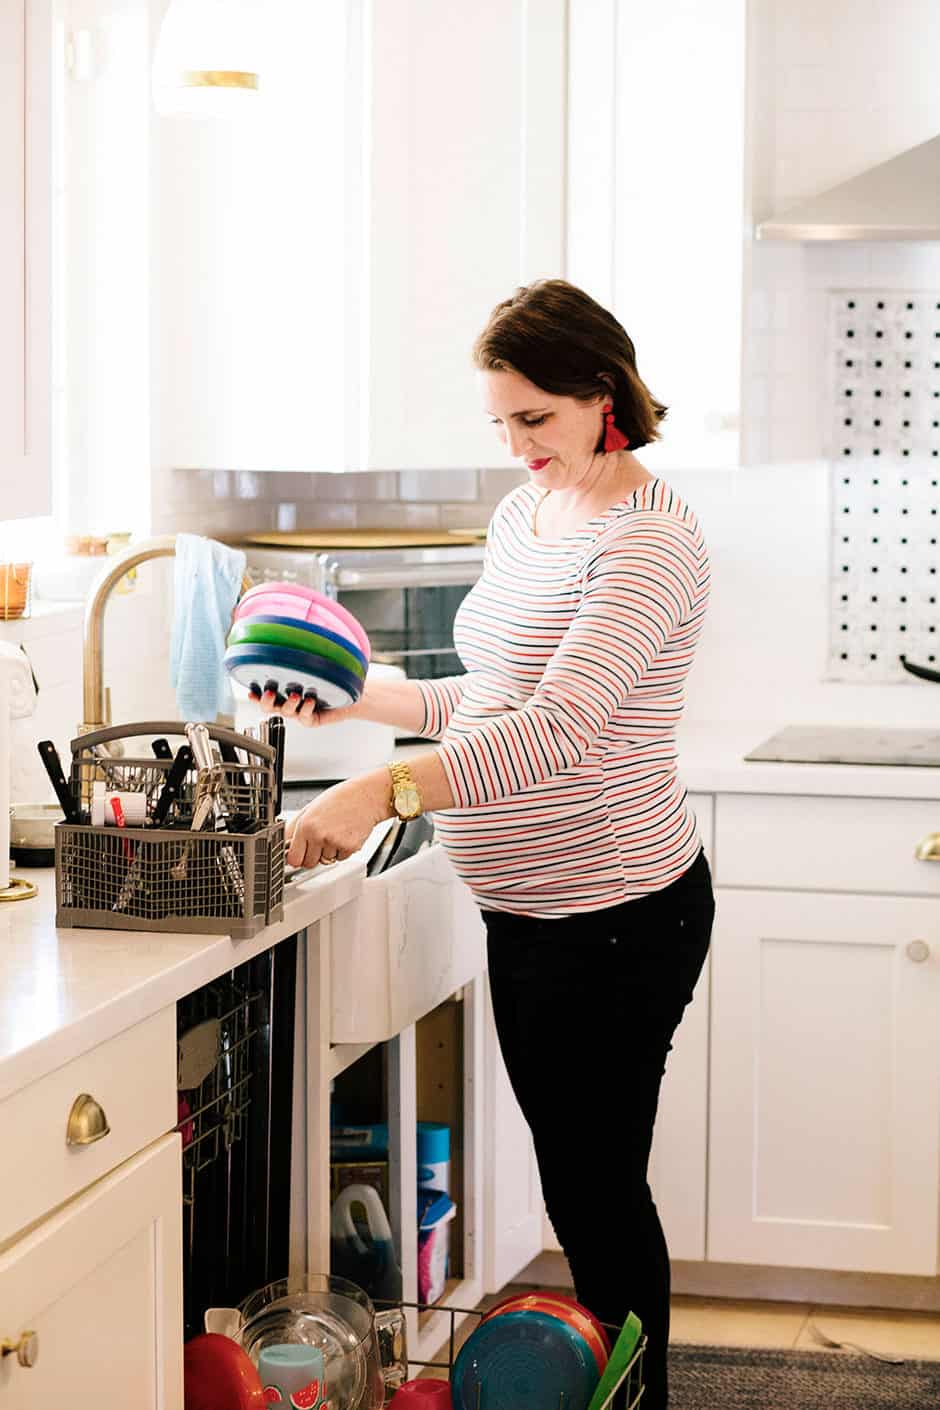 Being a mother is a beautiful, fulfilling and amazing role, but it's also hard work. It's a job that requires an emotional and physical toll like no other. Read on for encouragement for moms who are trying their best!